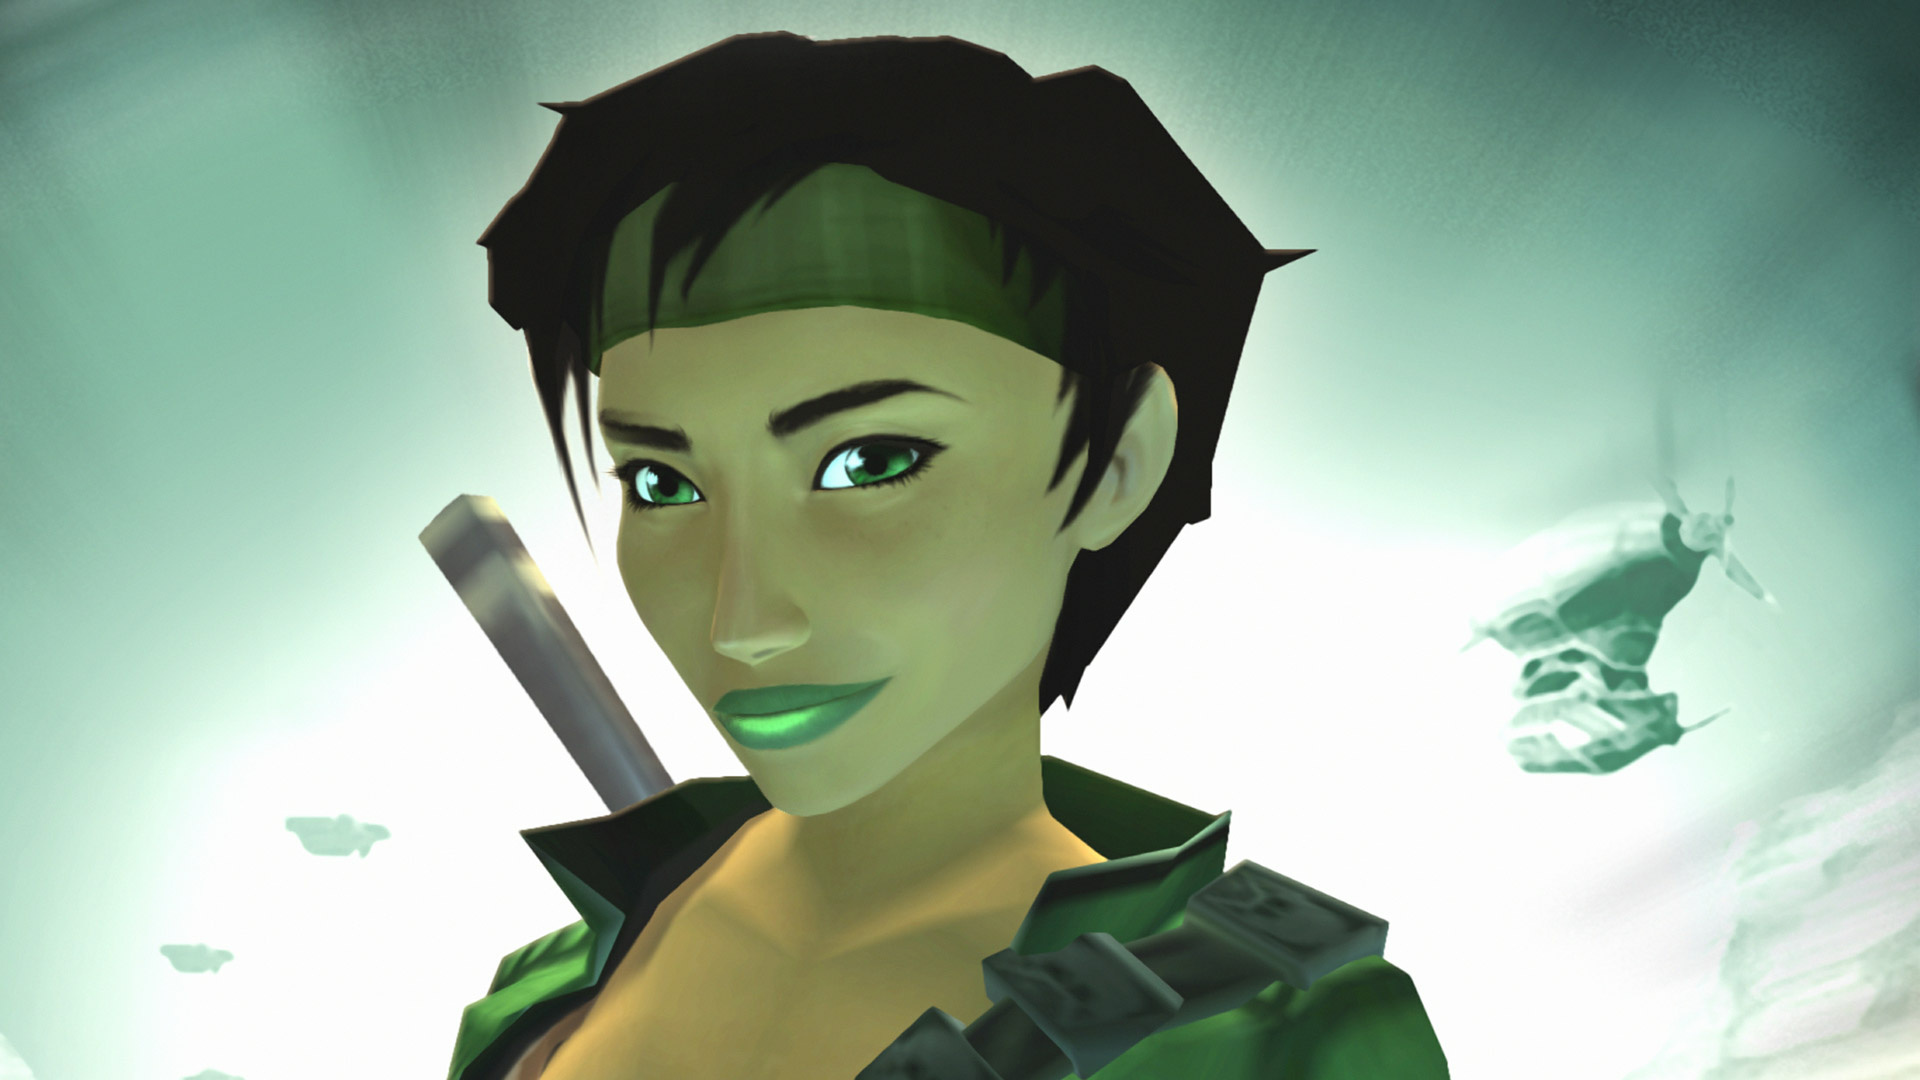 Beyond Good and Evil (Game): Jade, The main protagonist of the Ubisoft's action-adventure video game, Green jacket. 1920x1080 Full HD Wallpaper.